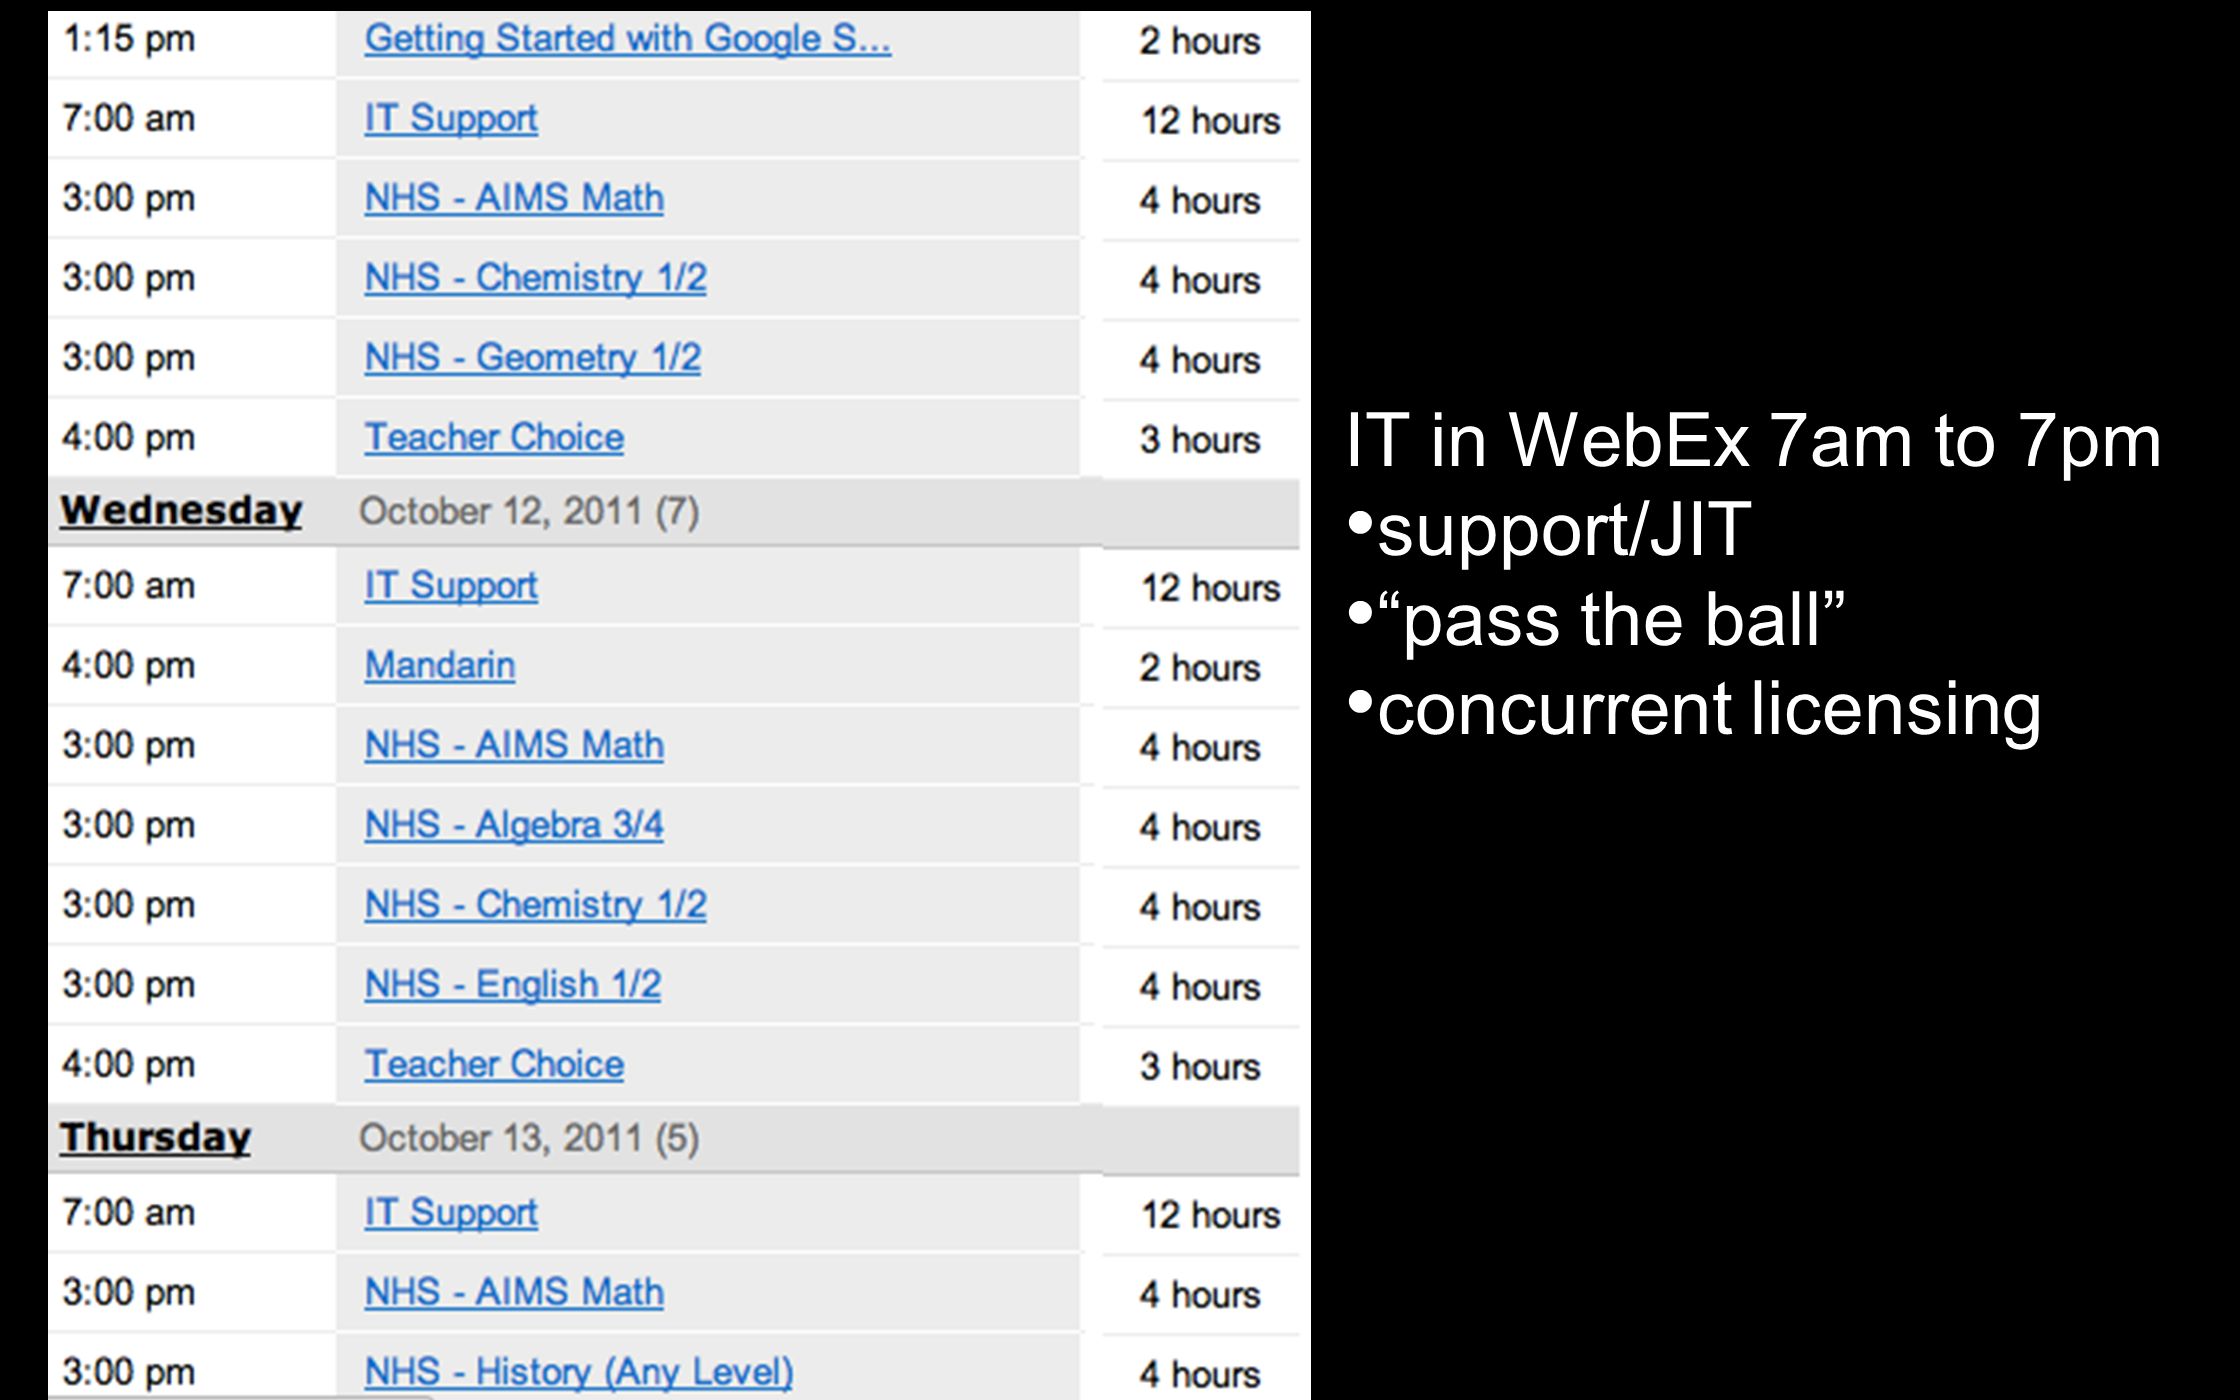 IT in WebEx 7am to 7pm support/JIT pass the ball concurrent licensing